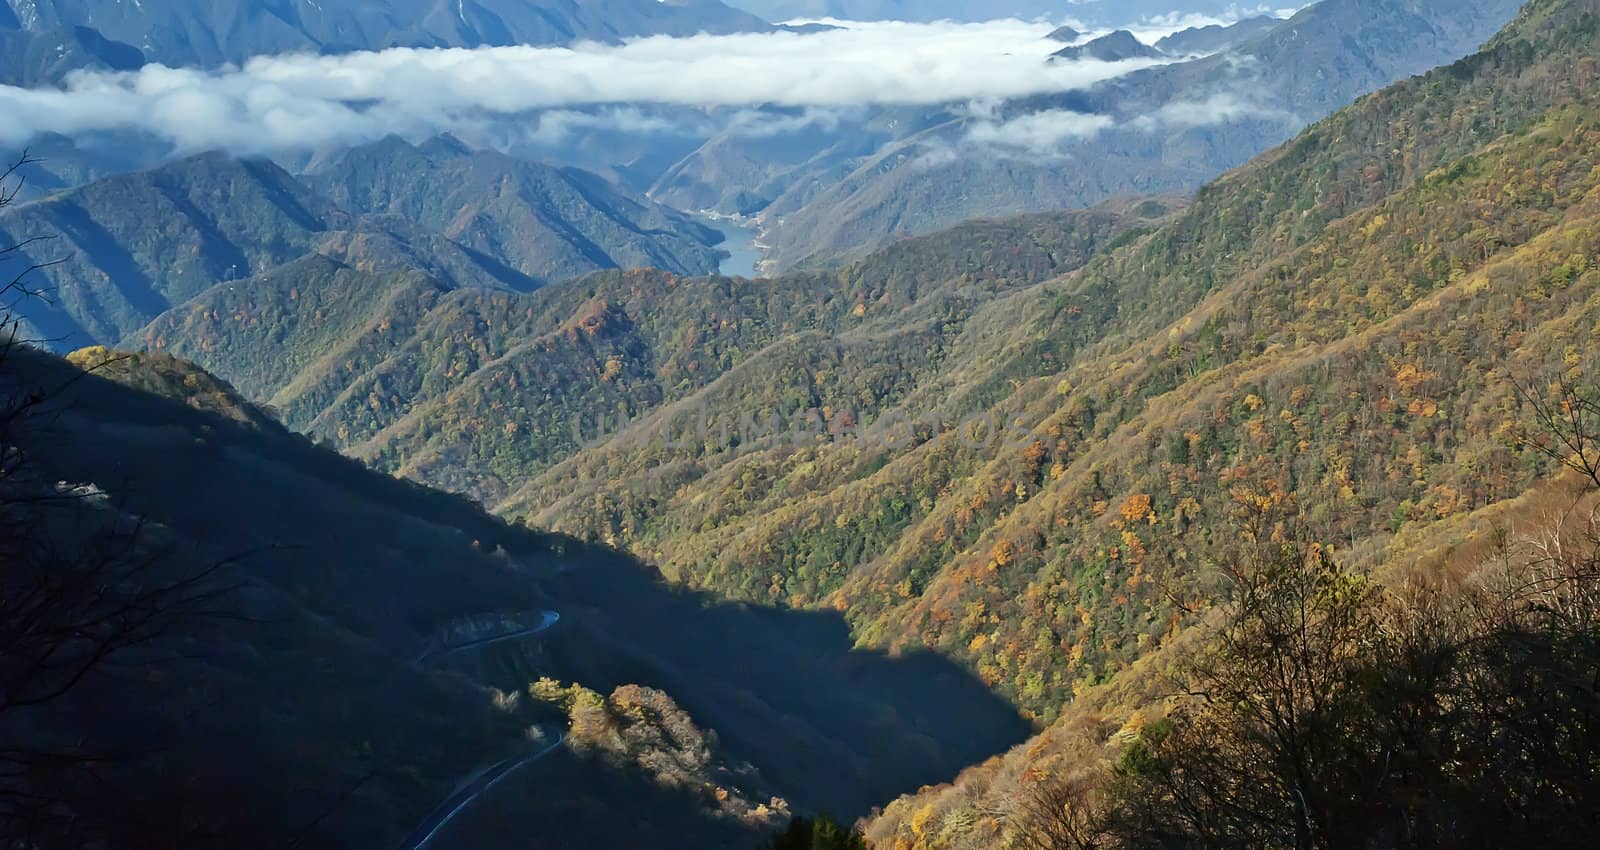 This photo was taken in China Shennongjia, in late autumn